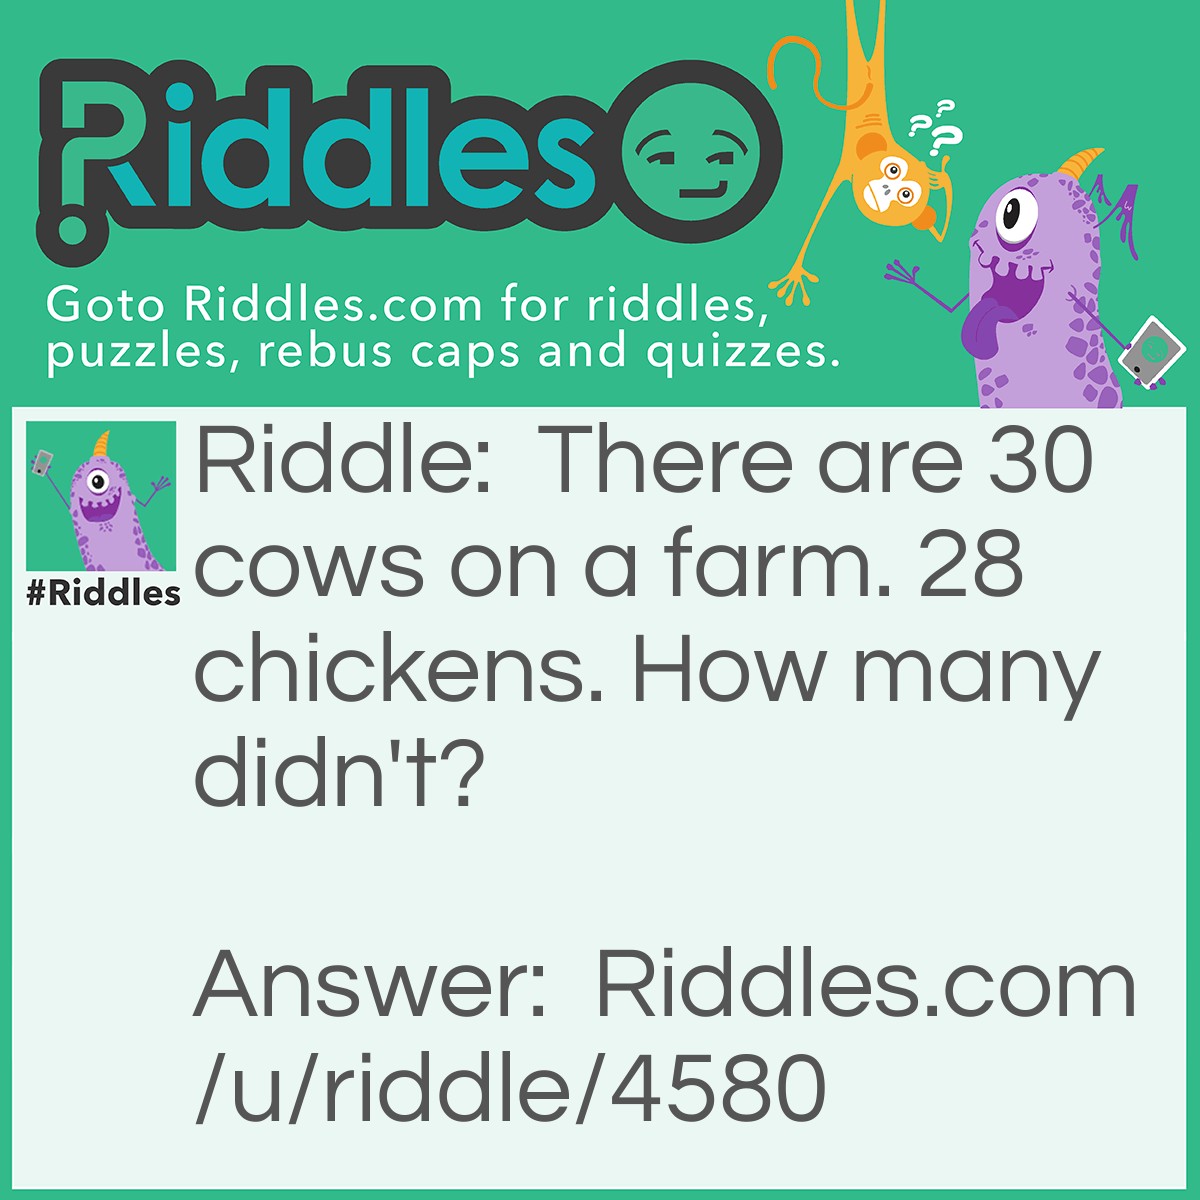 Riddle: There are 30 cows on a farm. 28 chickens. How many didn't? Answer: 10.